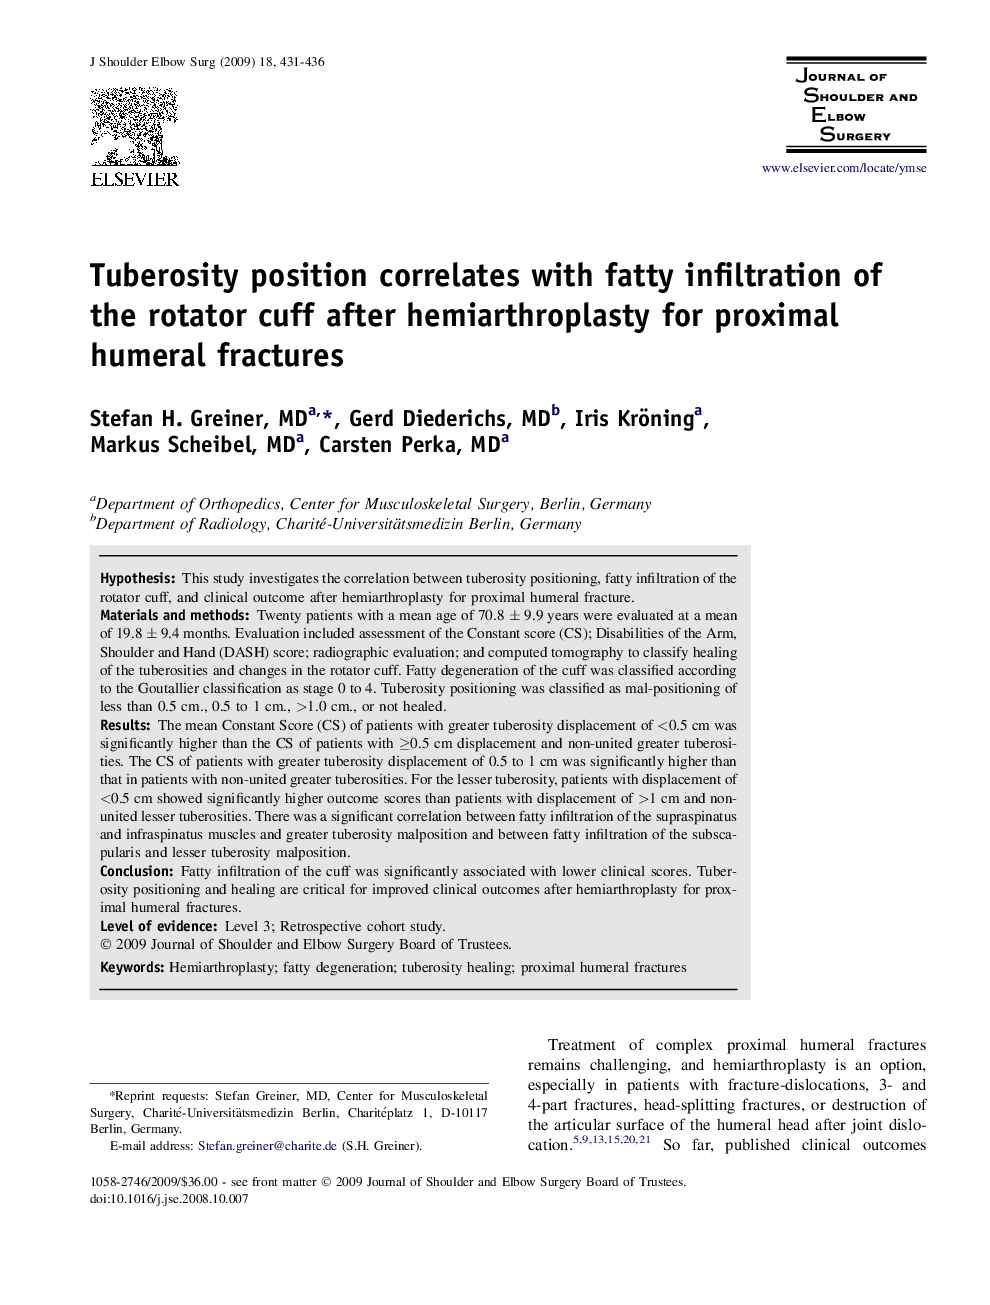 Tuberosity position correlates with fatty infiltration of the rotator cuff after hemiarthroplasty for proximal humeral fractures